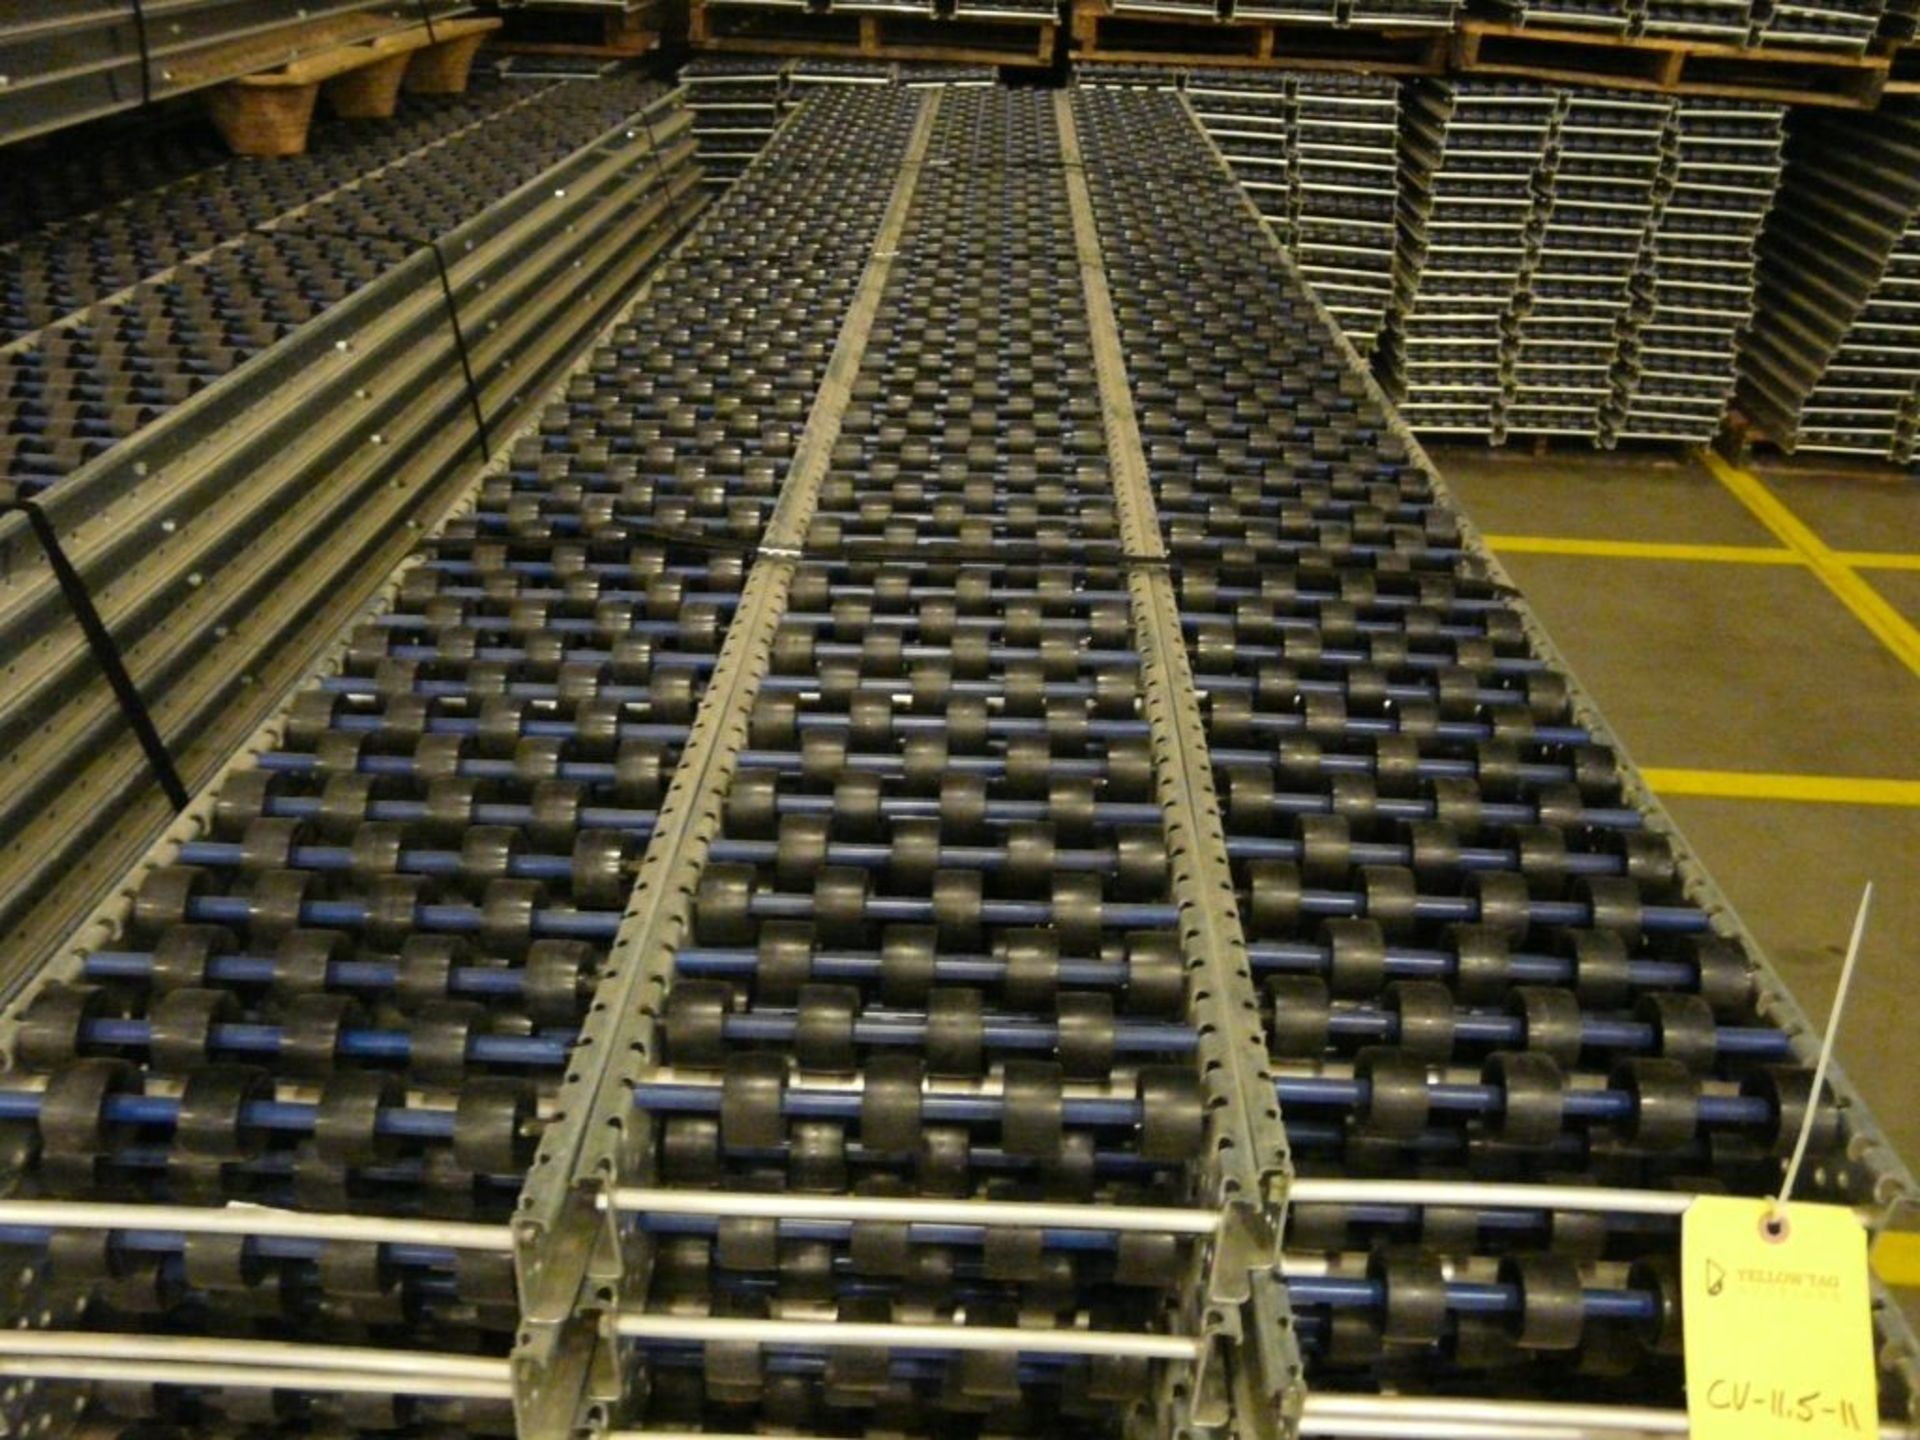 Lot of (90) SpanTrack Wheelbed Carton Flow Conveyors - 11.5'L x 11"W; Tag: 223551 - $30 Lot - Image 3 of 4